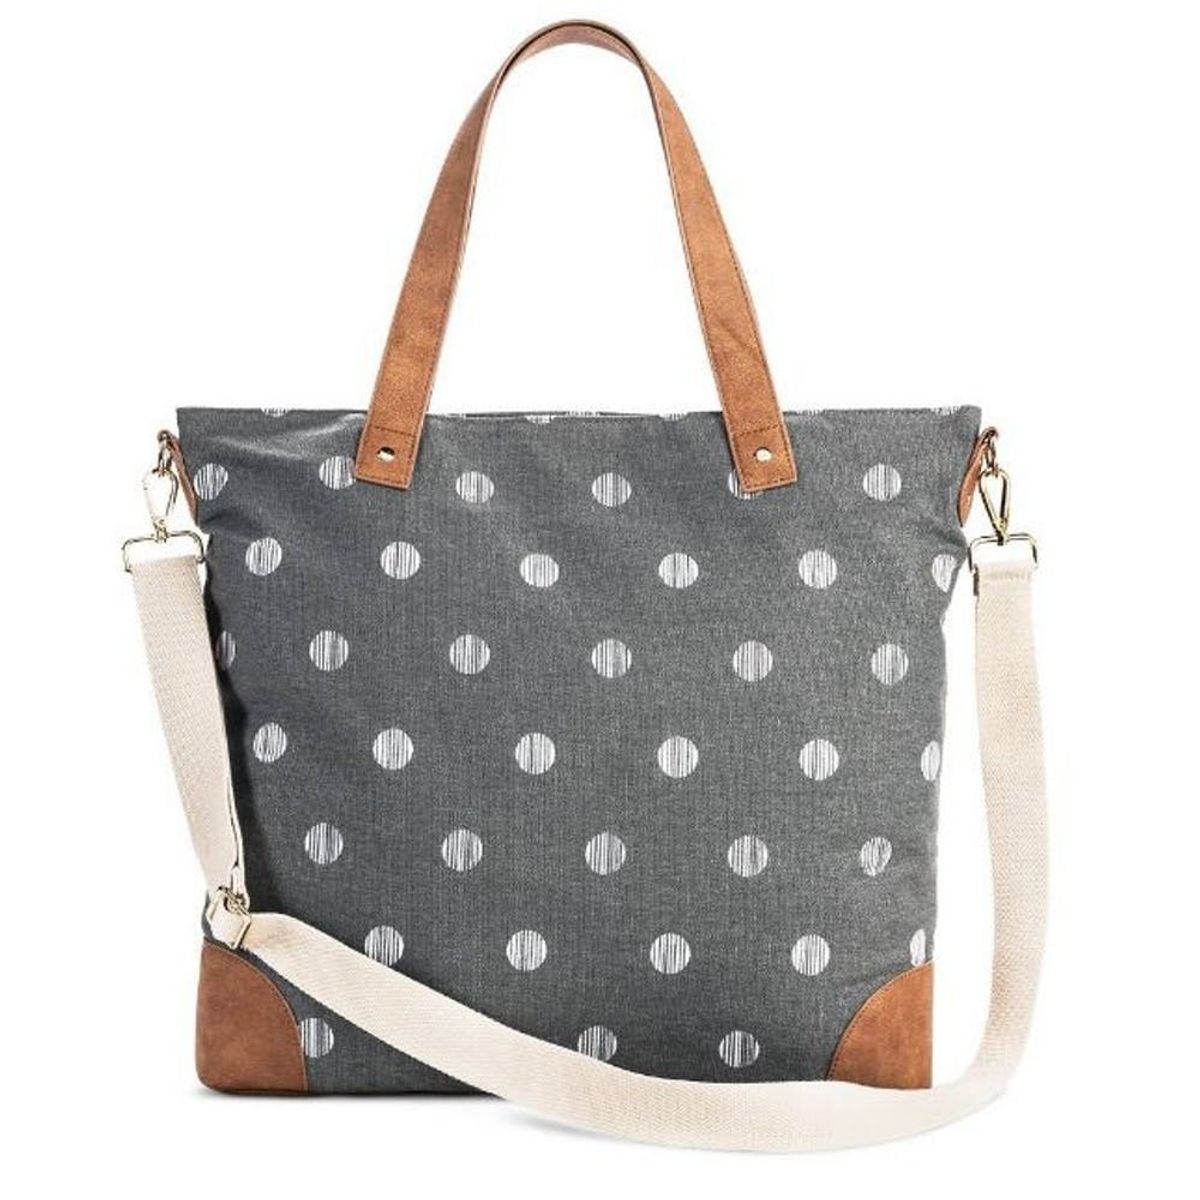 10 Cool Alternatives for Not-So-Obvious Diaper Bags